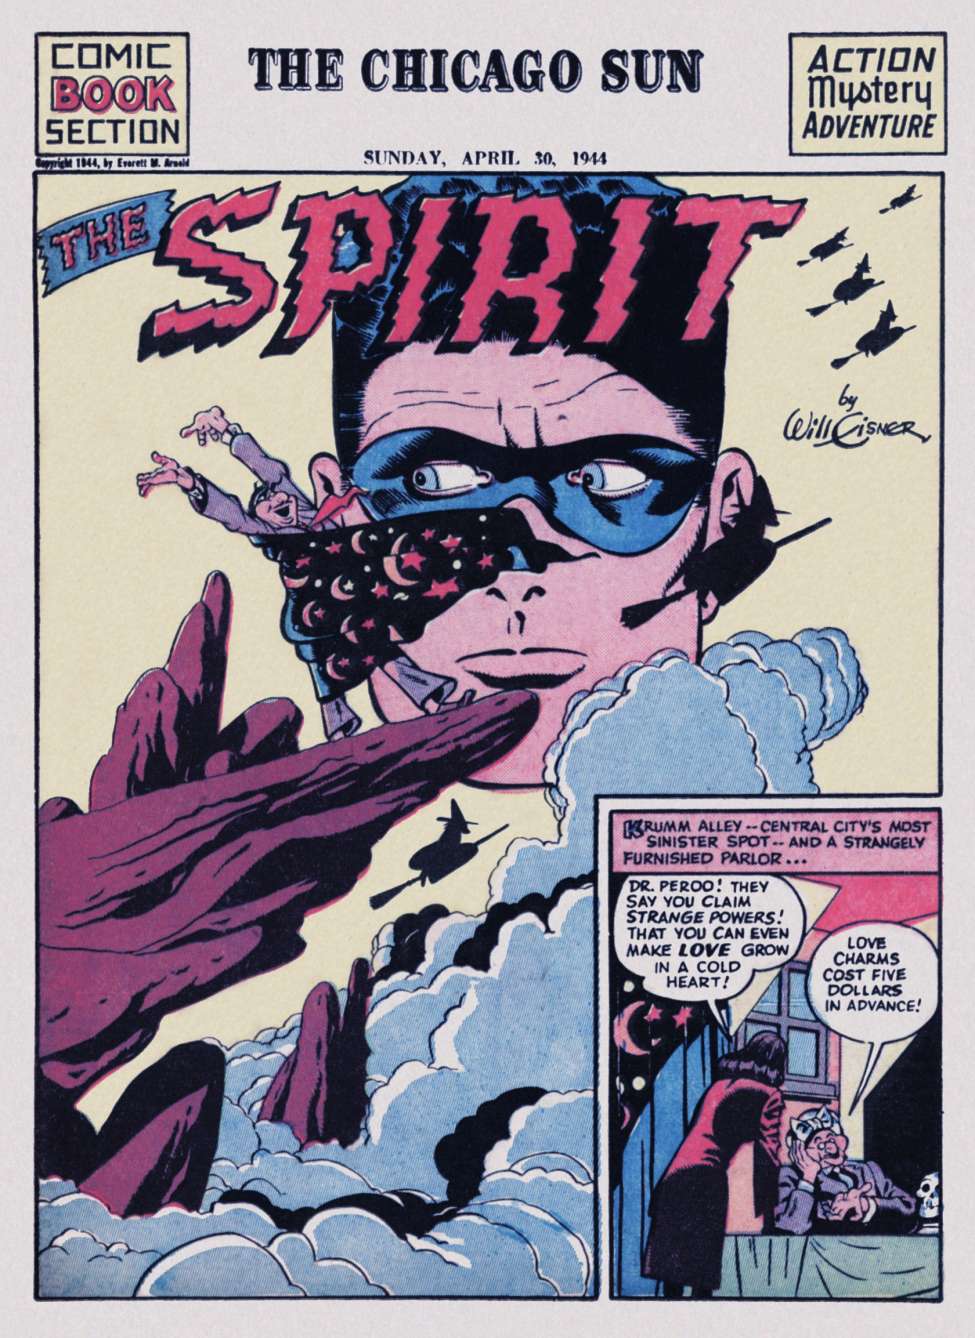 Book Cover For The Spirit (1944-04-30) - Chicago Sun